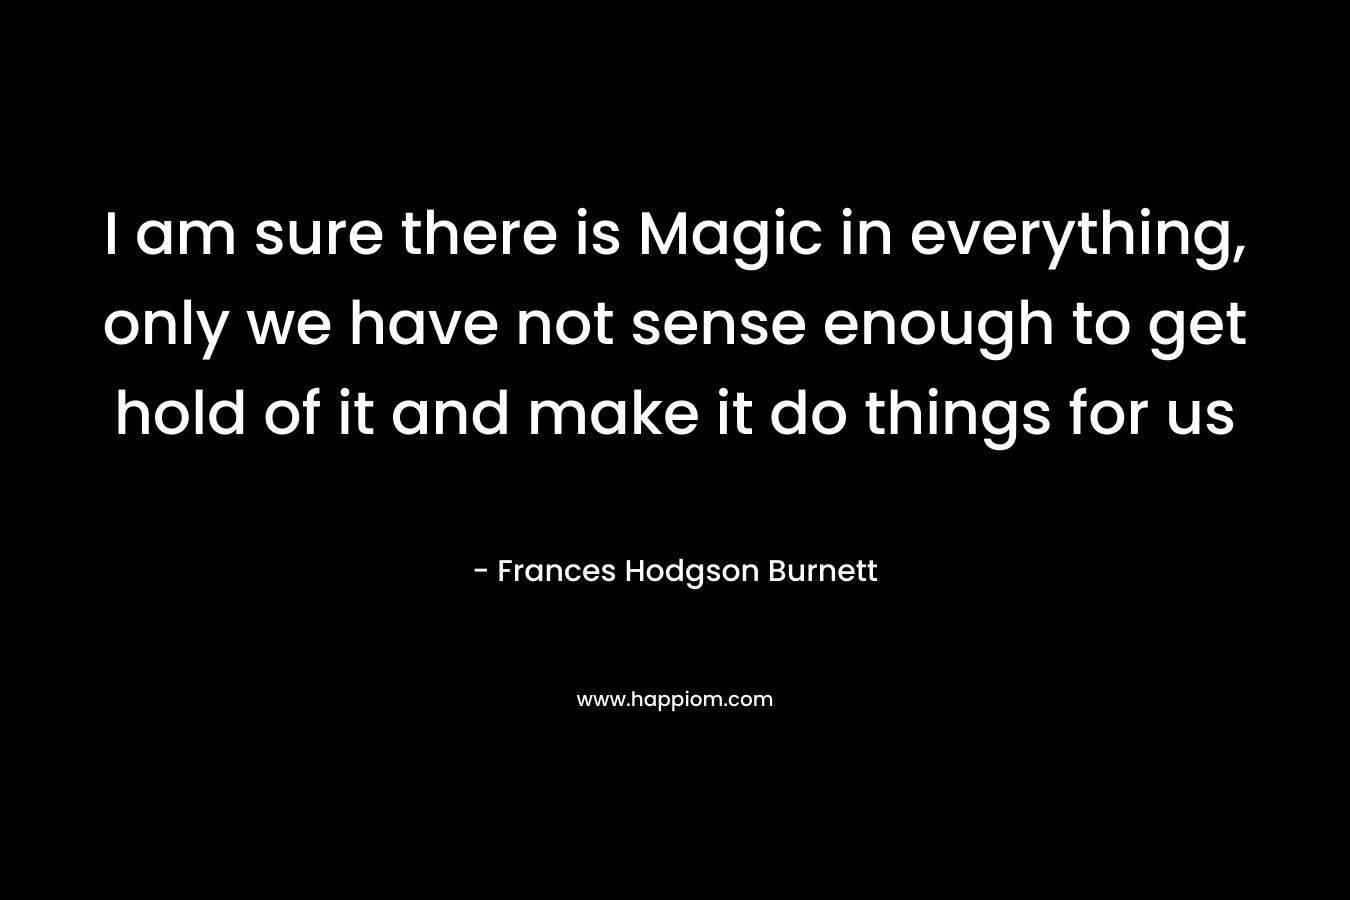 I am sure there is Magic in everything, only we have not sense enough to get hold of it and make it do things for us